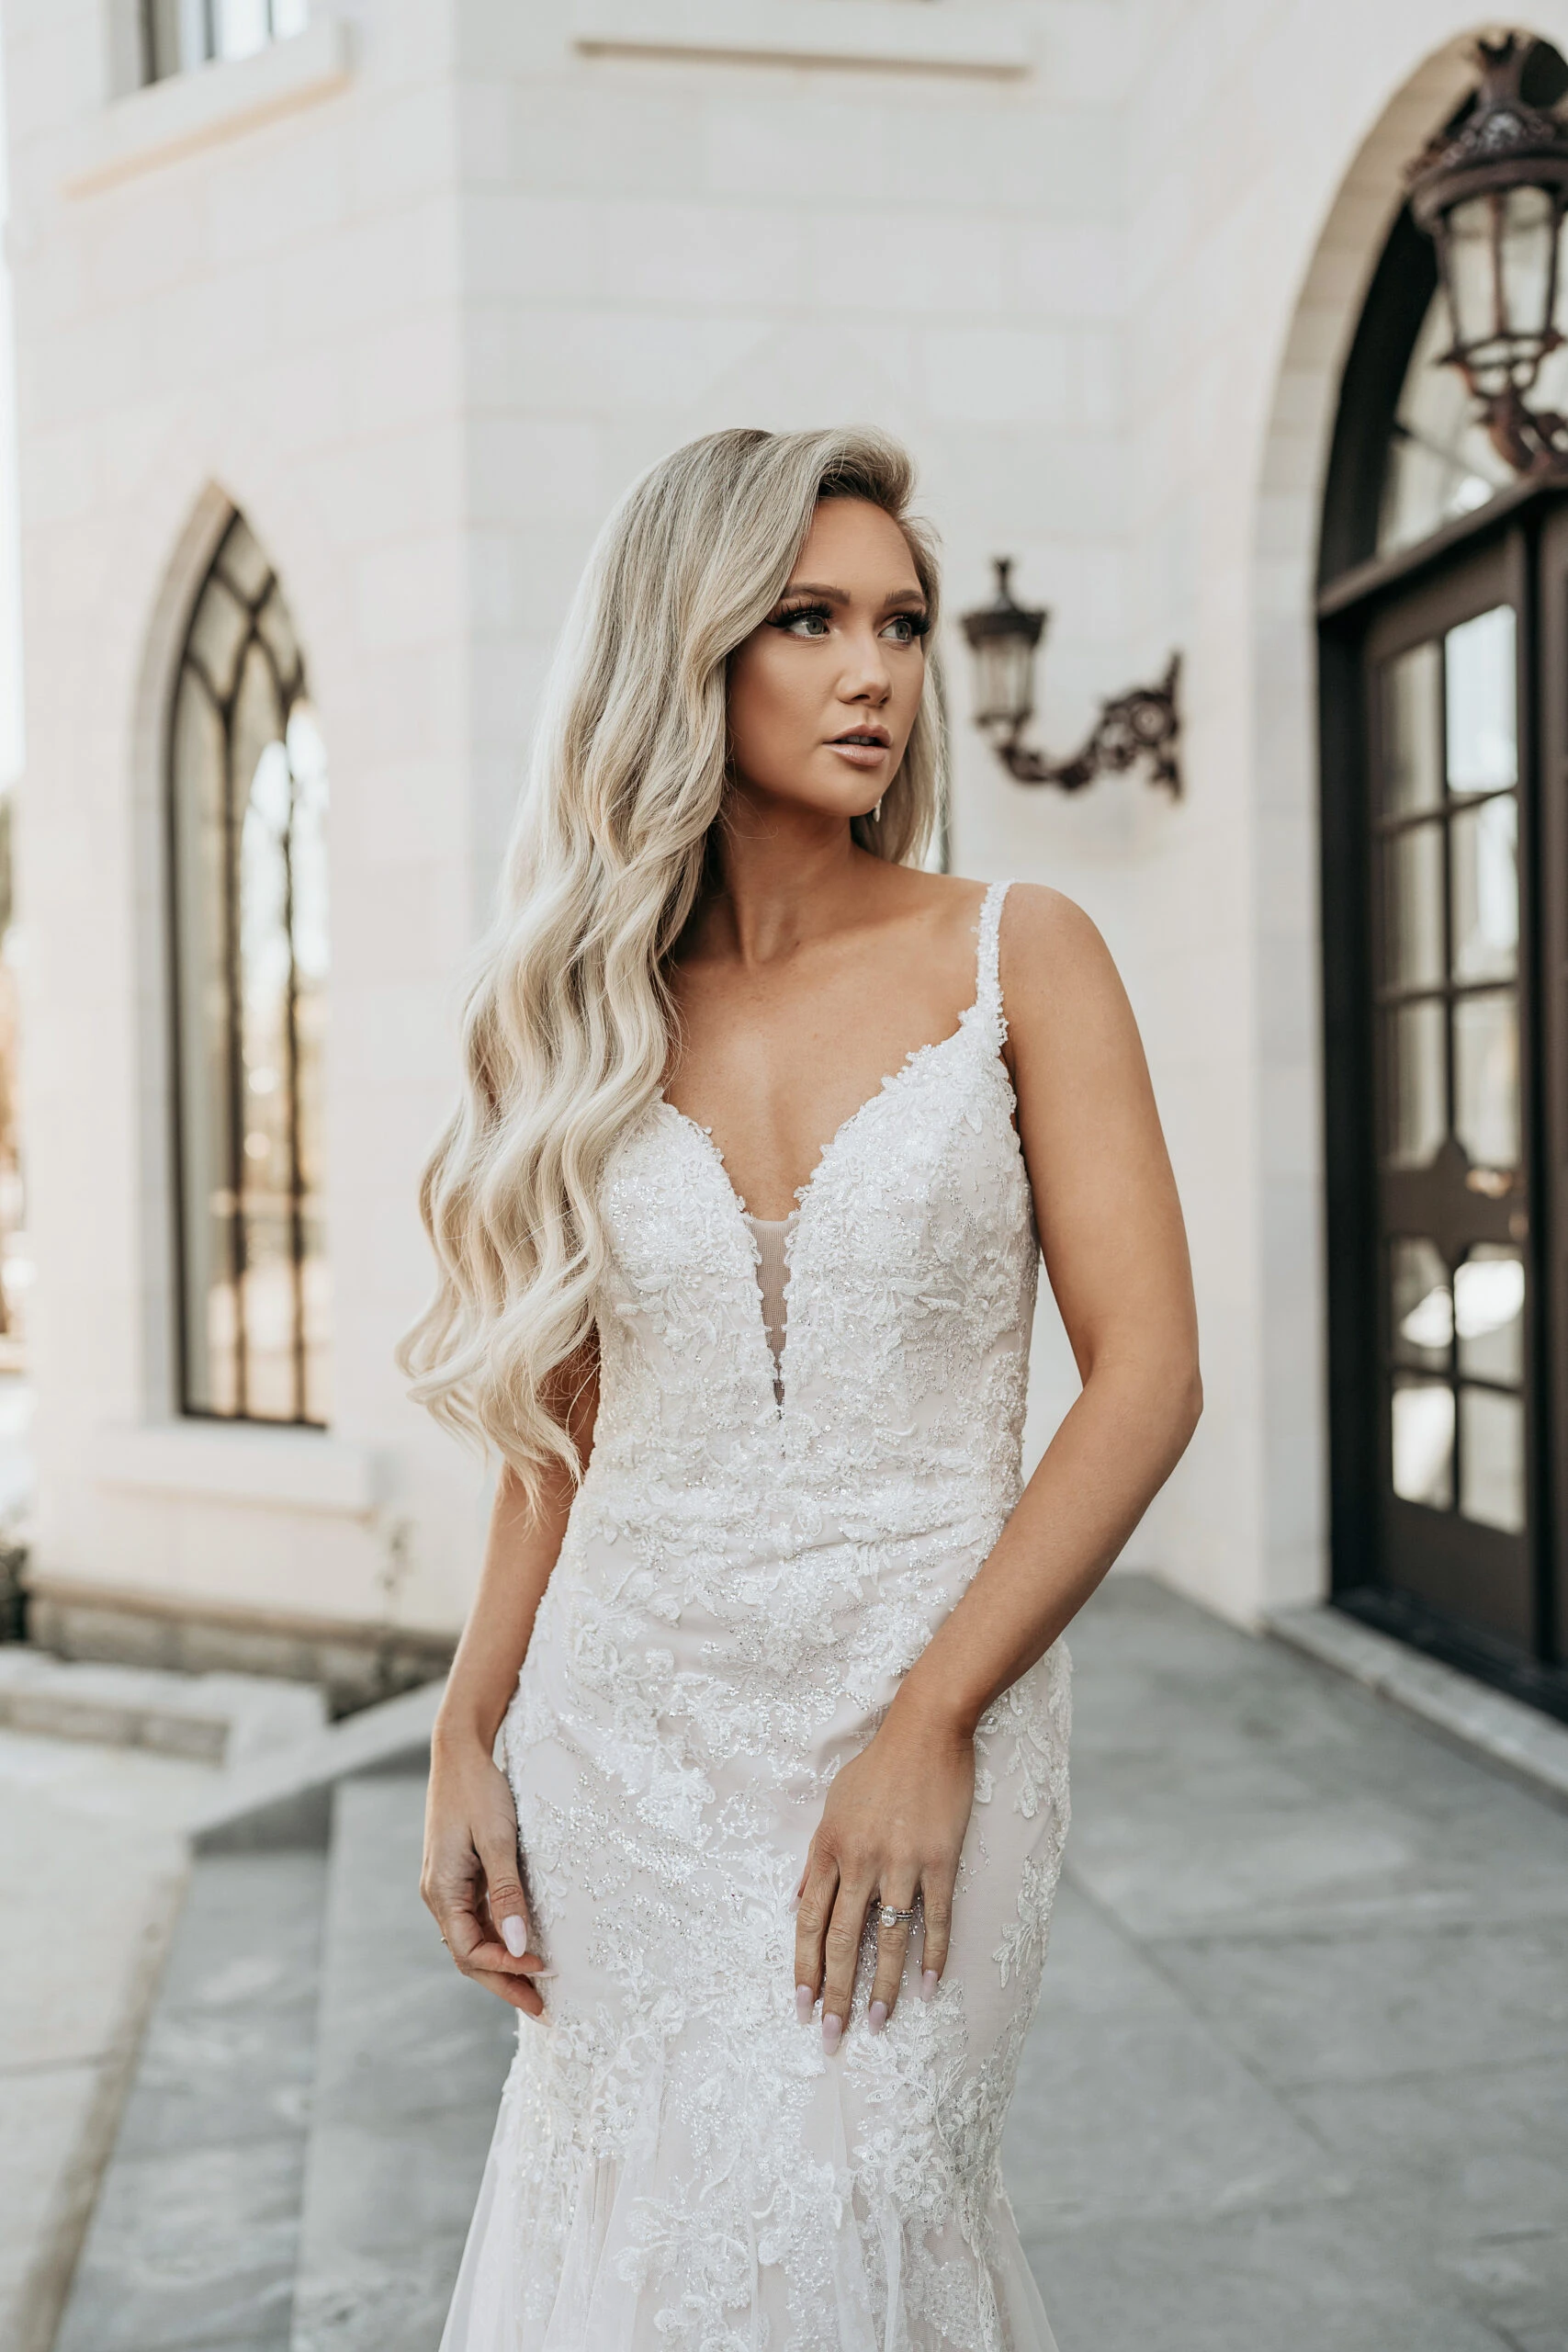 Bride wearing Lace wedding gown